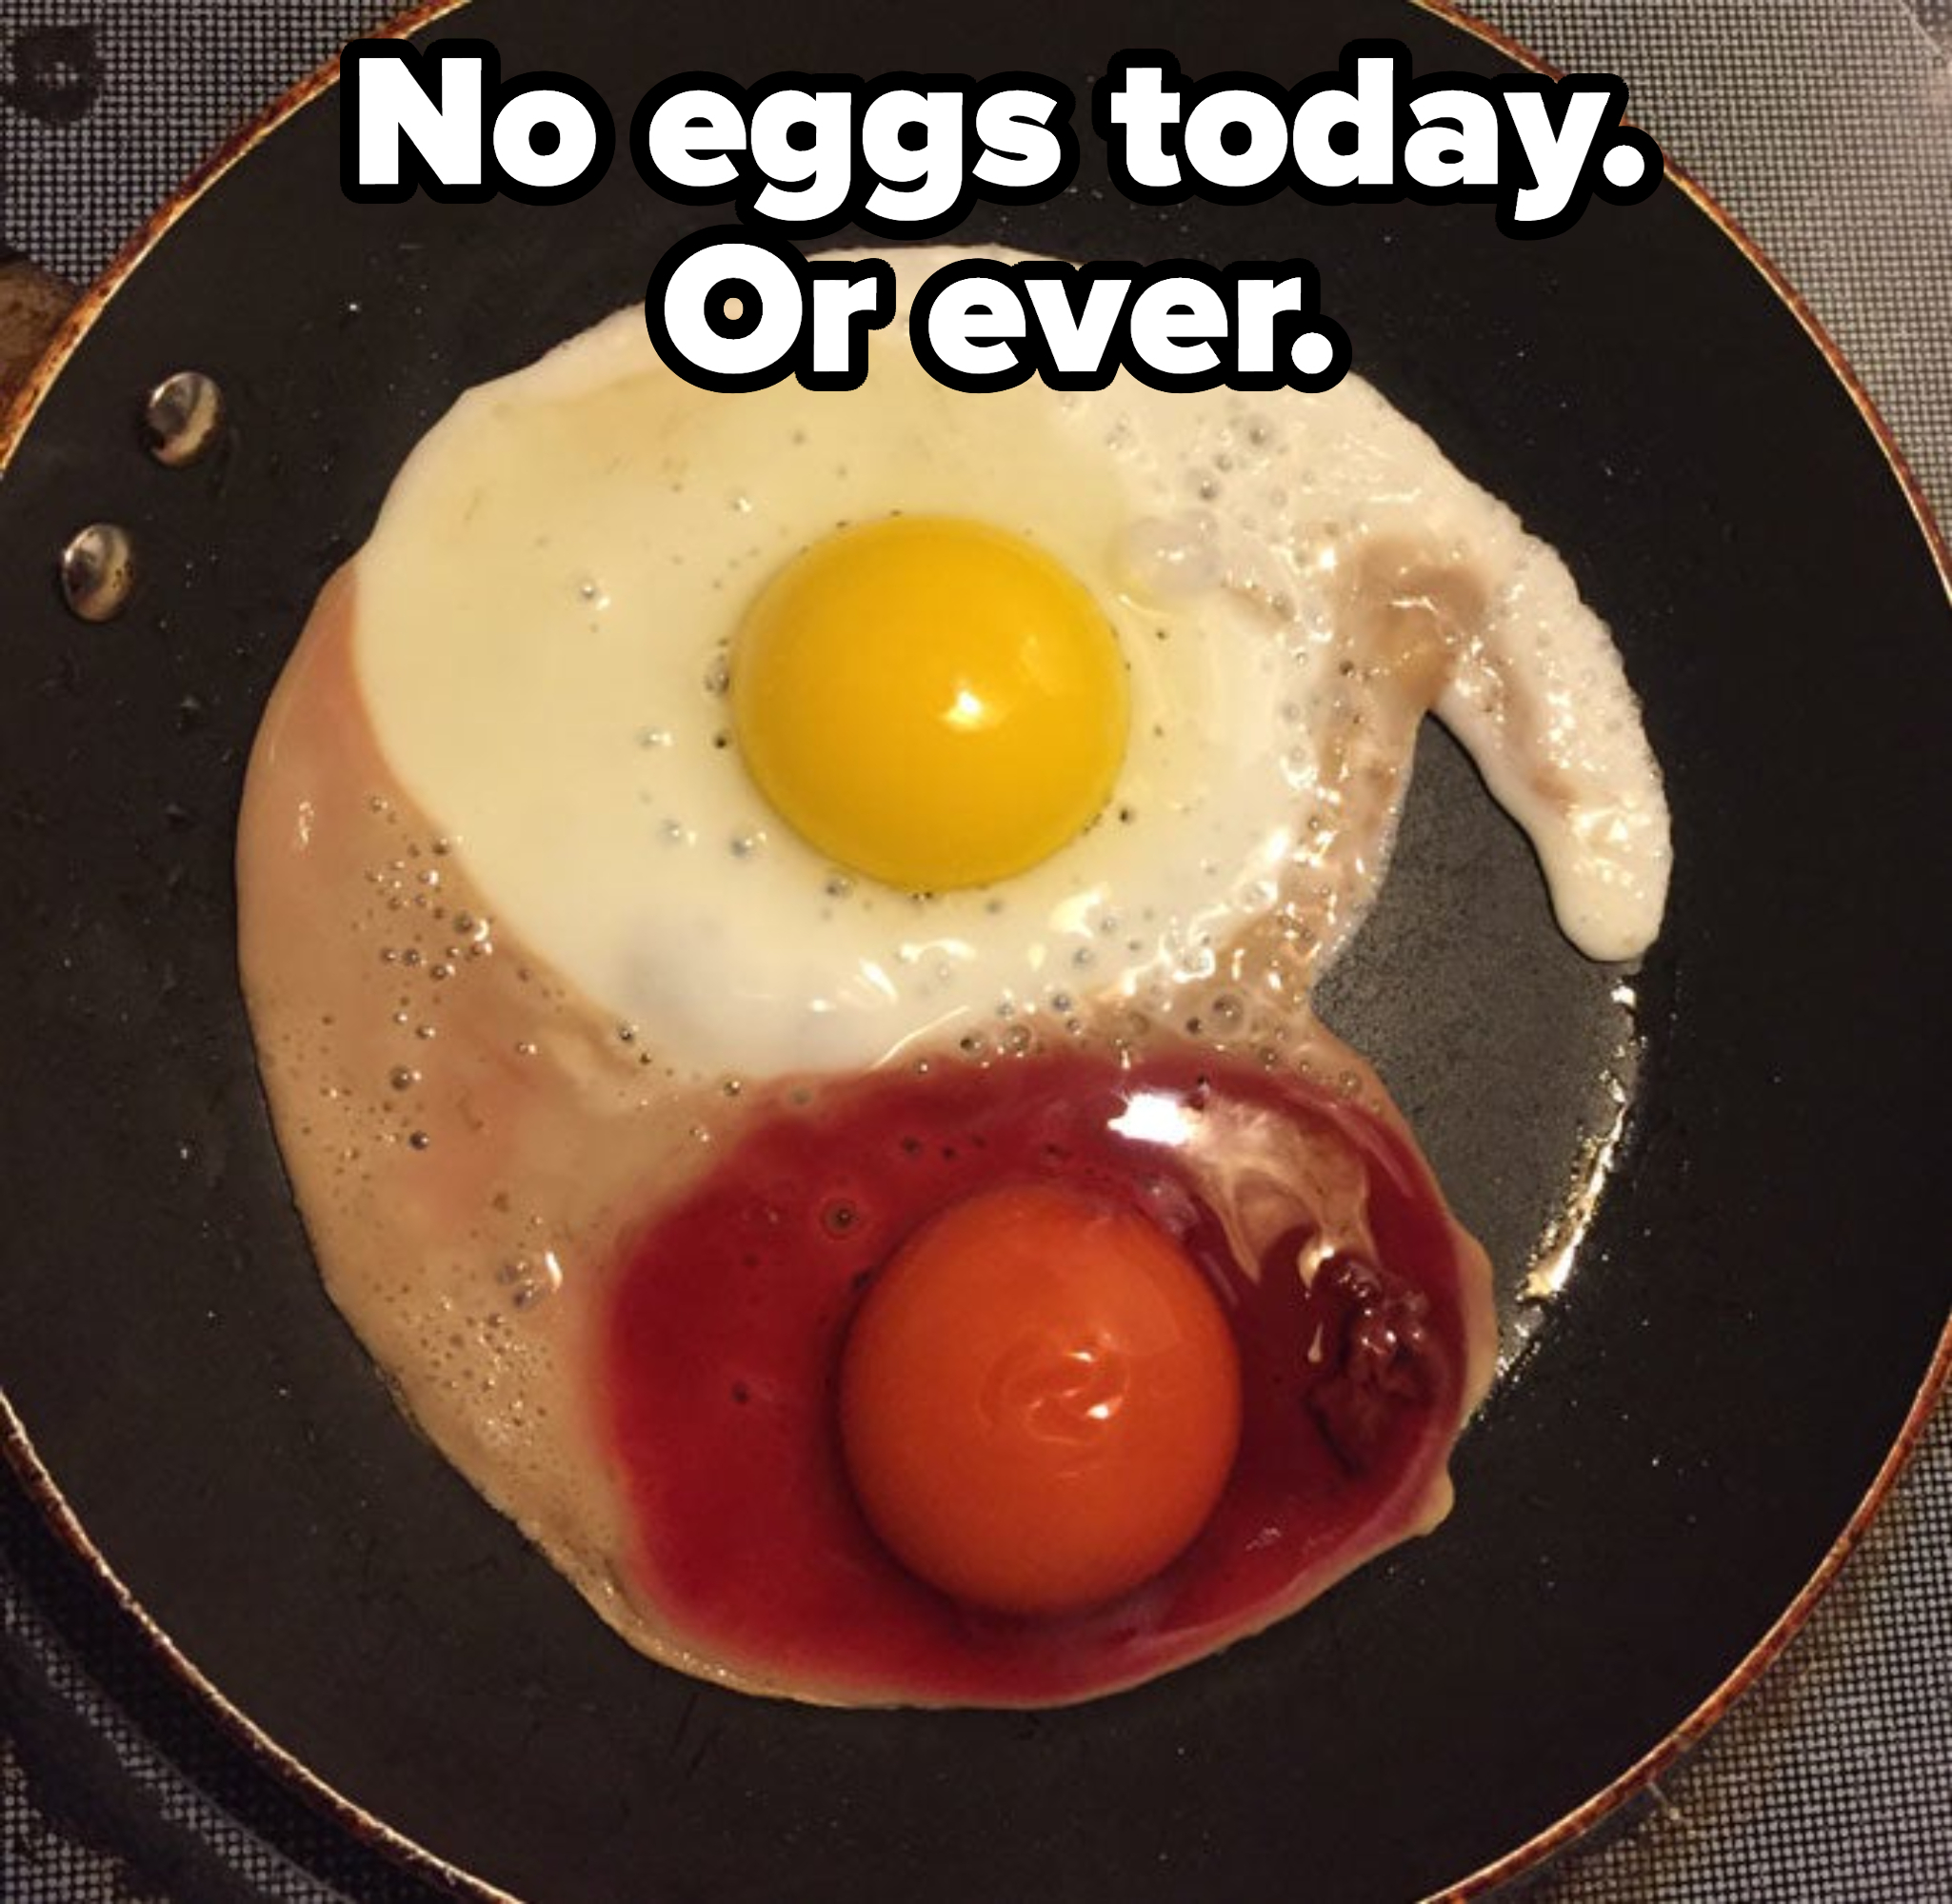 Two eggs frying in a pan — one of them is red